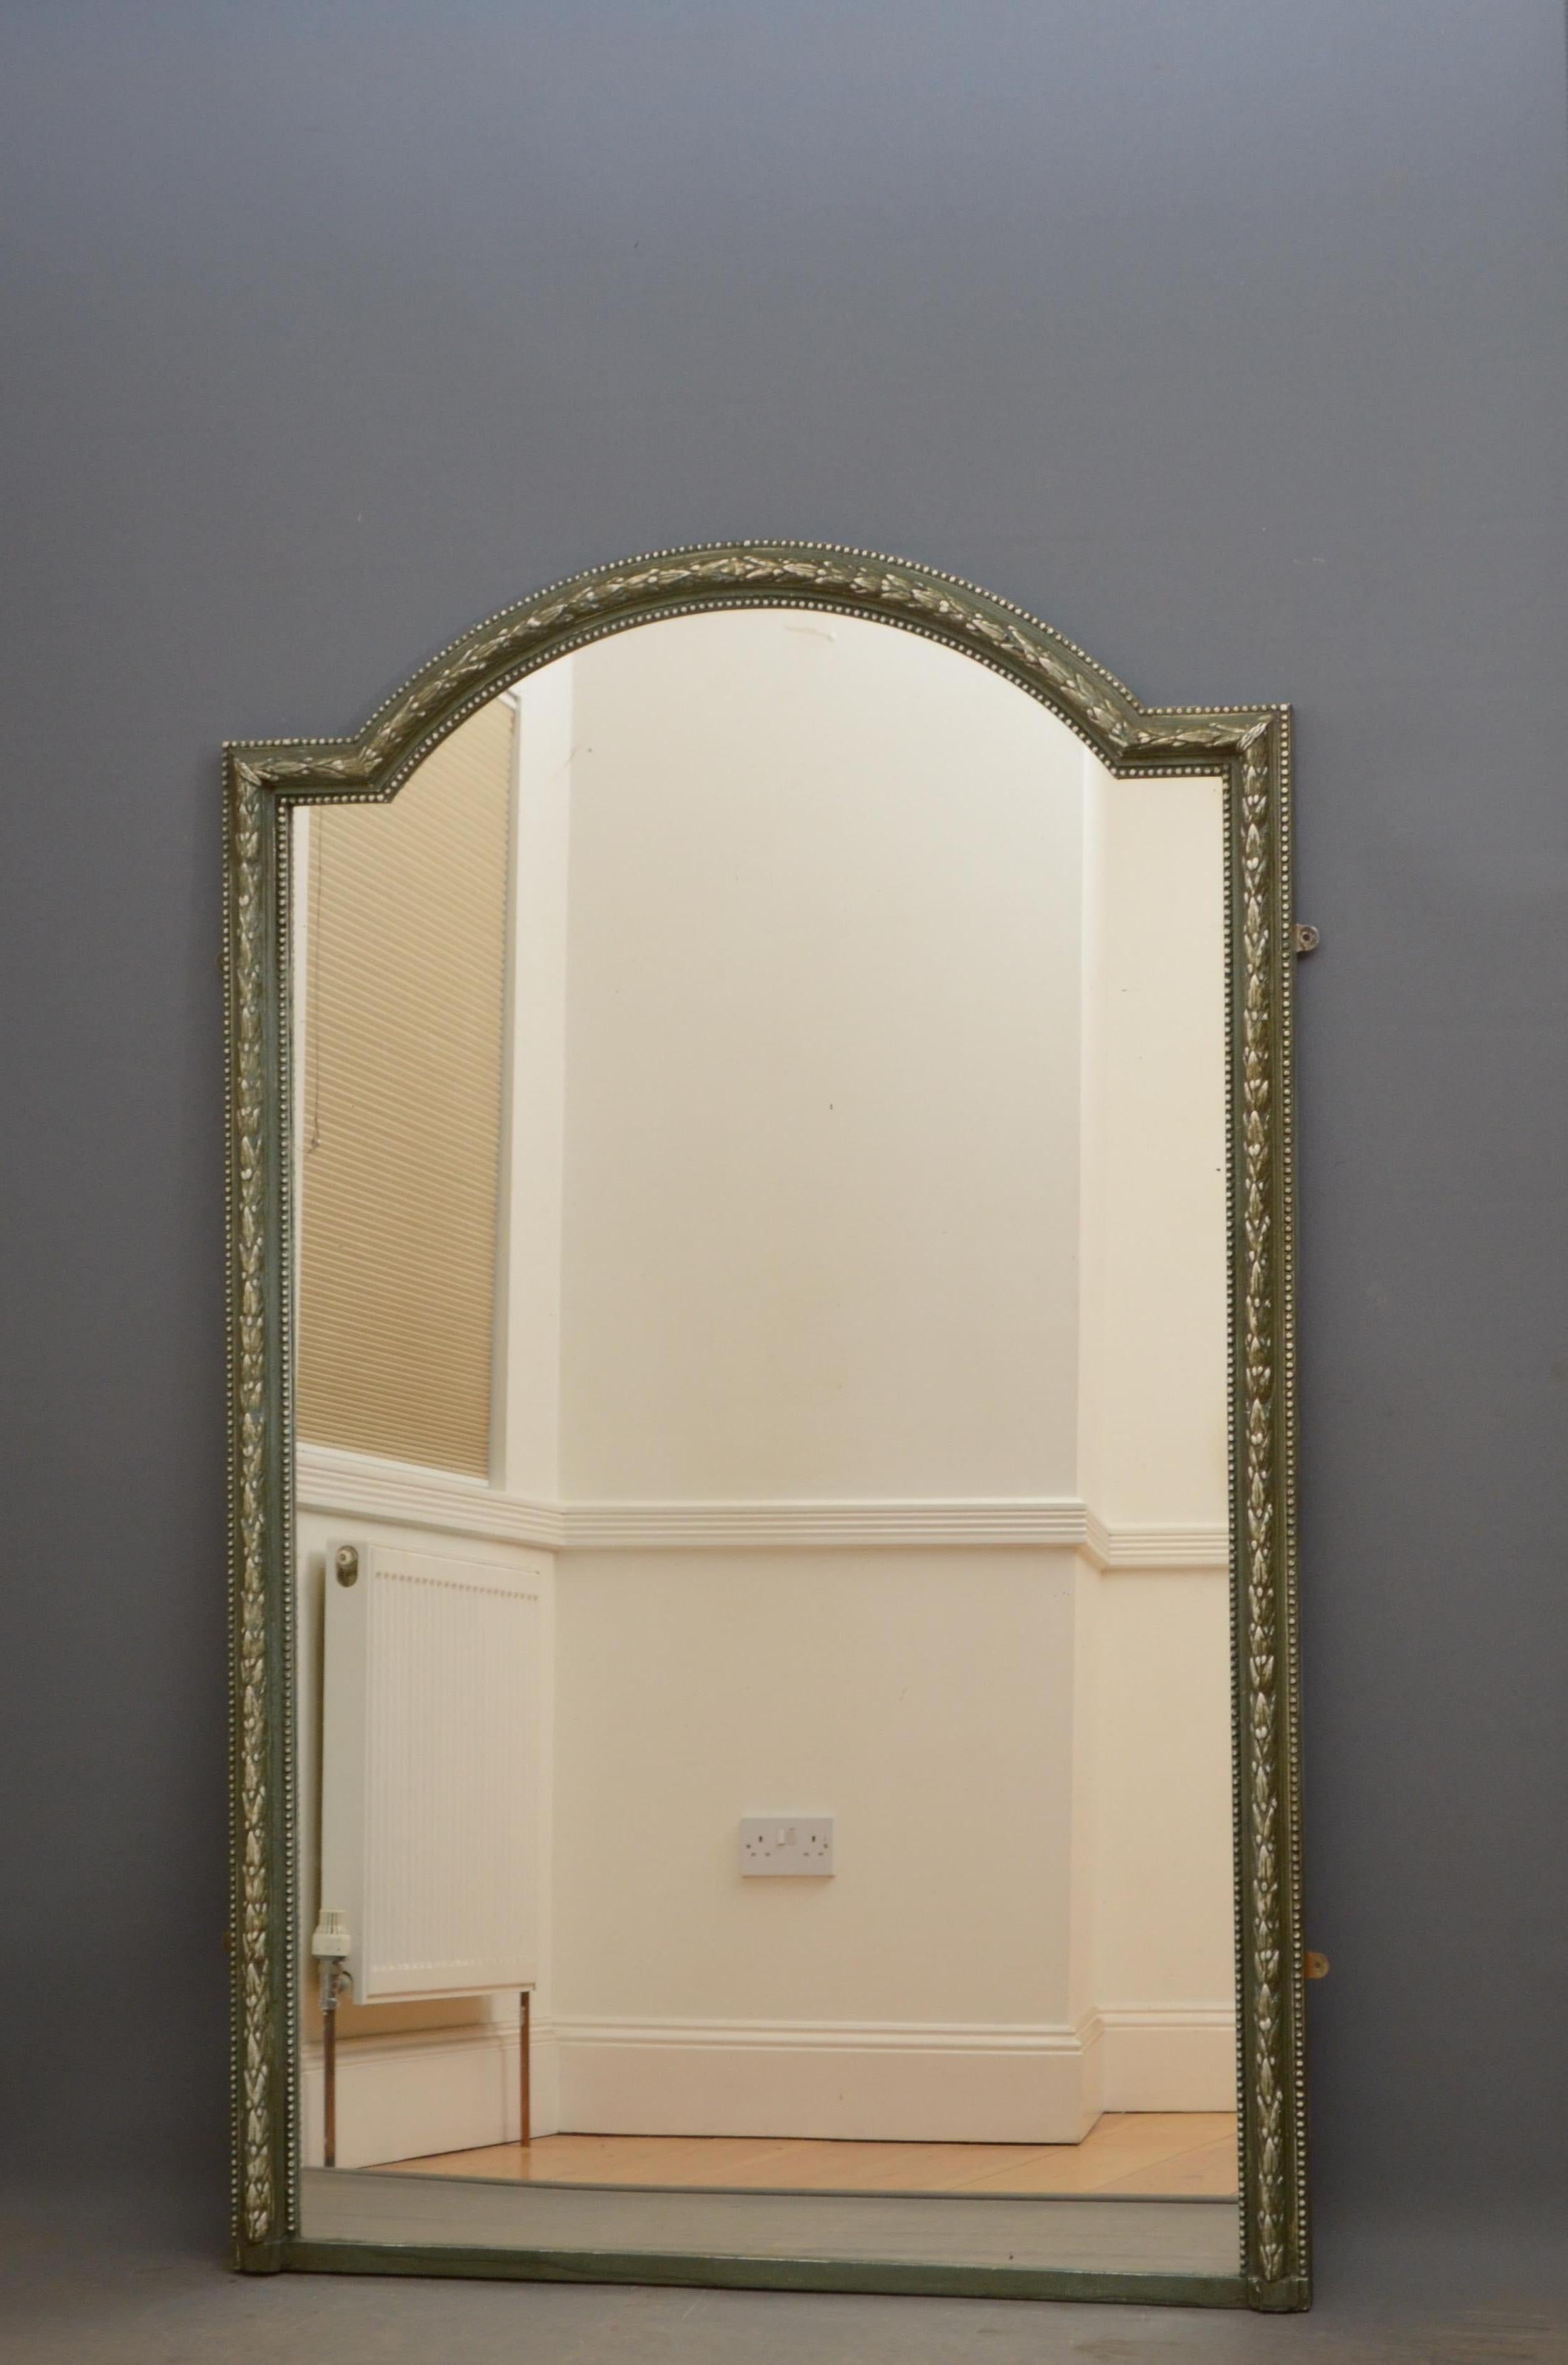 Sn4841 a large French full size mirror, having original glass with some imperfection in beaded and floral carved green and cream frame. This mirror can be placed on the wall or can be leaned on the wall and use a dressing mirror. The mirror has been